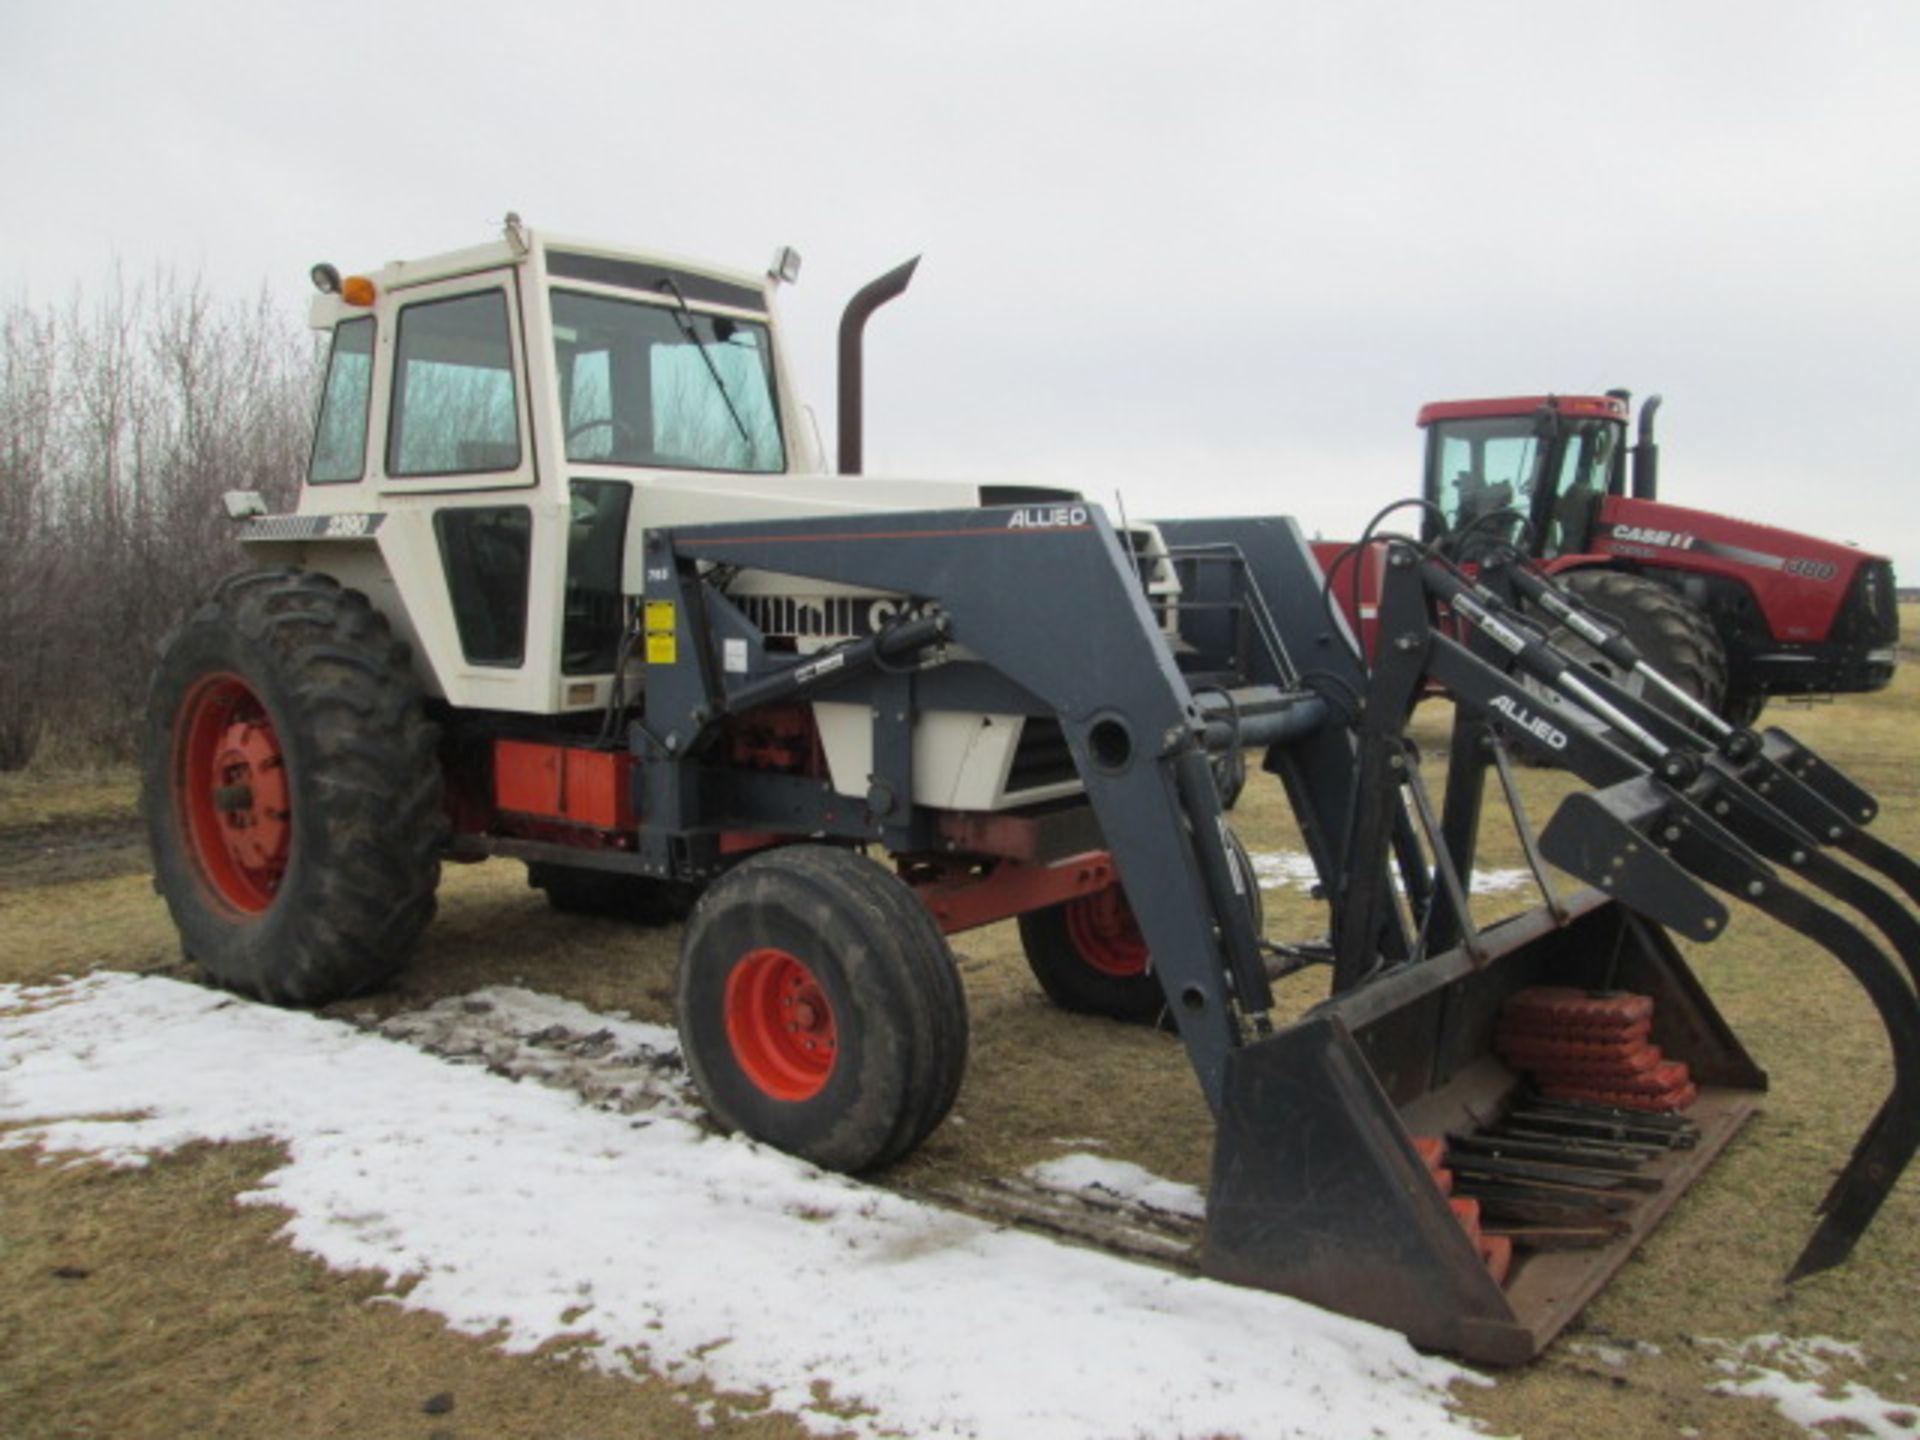 Case 2390 2WD c/w Allied 795 loader, 7' bucket & grapple, showing 6405 hr, 20.8x38 duals, 3 hyd, - Image 4 of 18